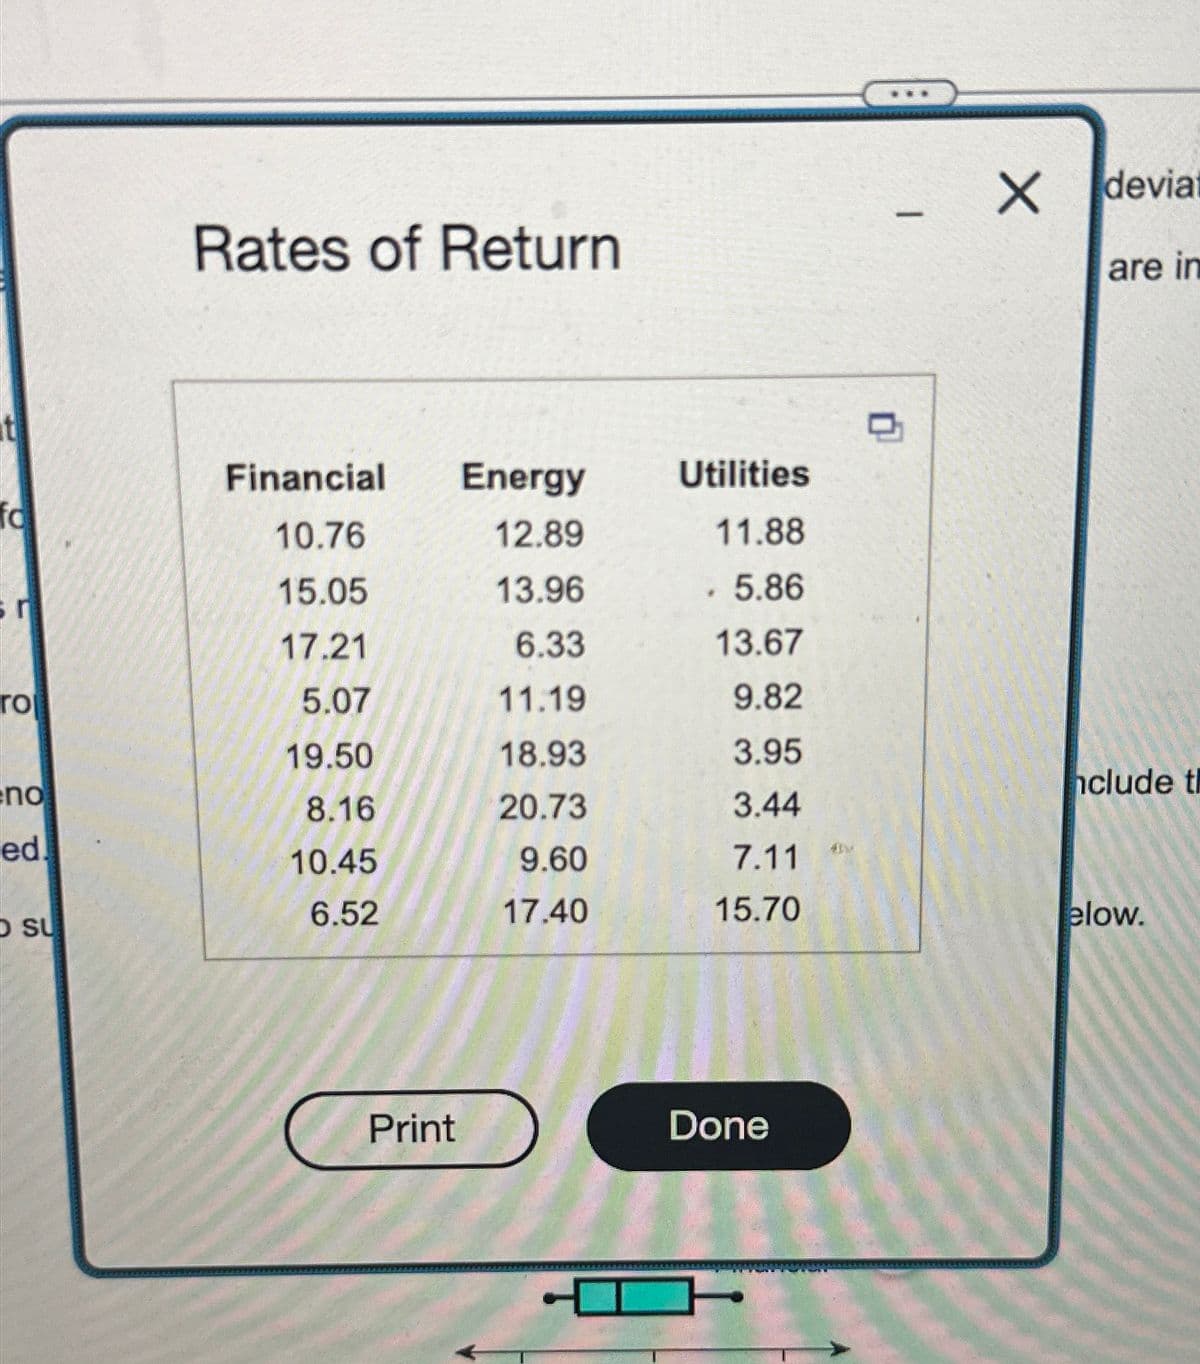 Rates of Return
-
✓
deviat
are in
D
Financial Energy
Utilities
fd
10.76
12.89
11.88
15.05
13.96
. 5.86
17.21
6.33
13.67
ro
5.07
11.19
9.82
19.50
18.93
3.95
no
nclude th
8.16
20.73
3.44
ed.
10.45
9.60
7.11
6.52
17.40
15.70
O SU
elow.
Print
Done